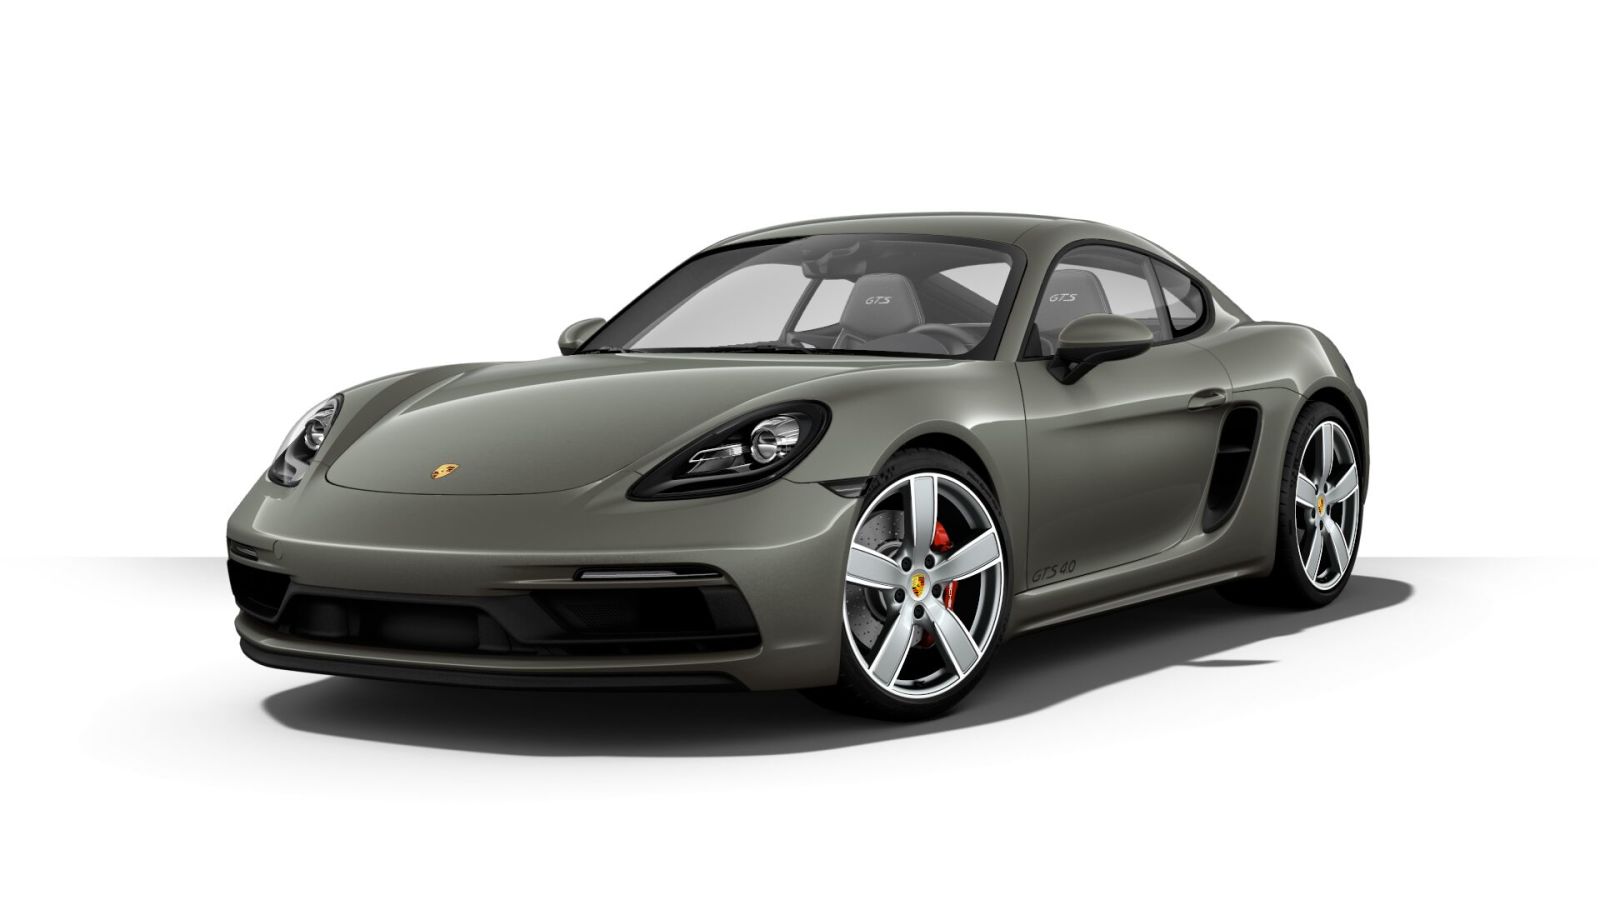 Illustration for article titled Porsche Cayman GTS 4.0 Configurator